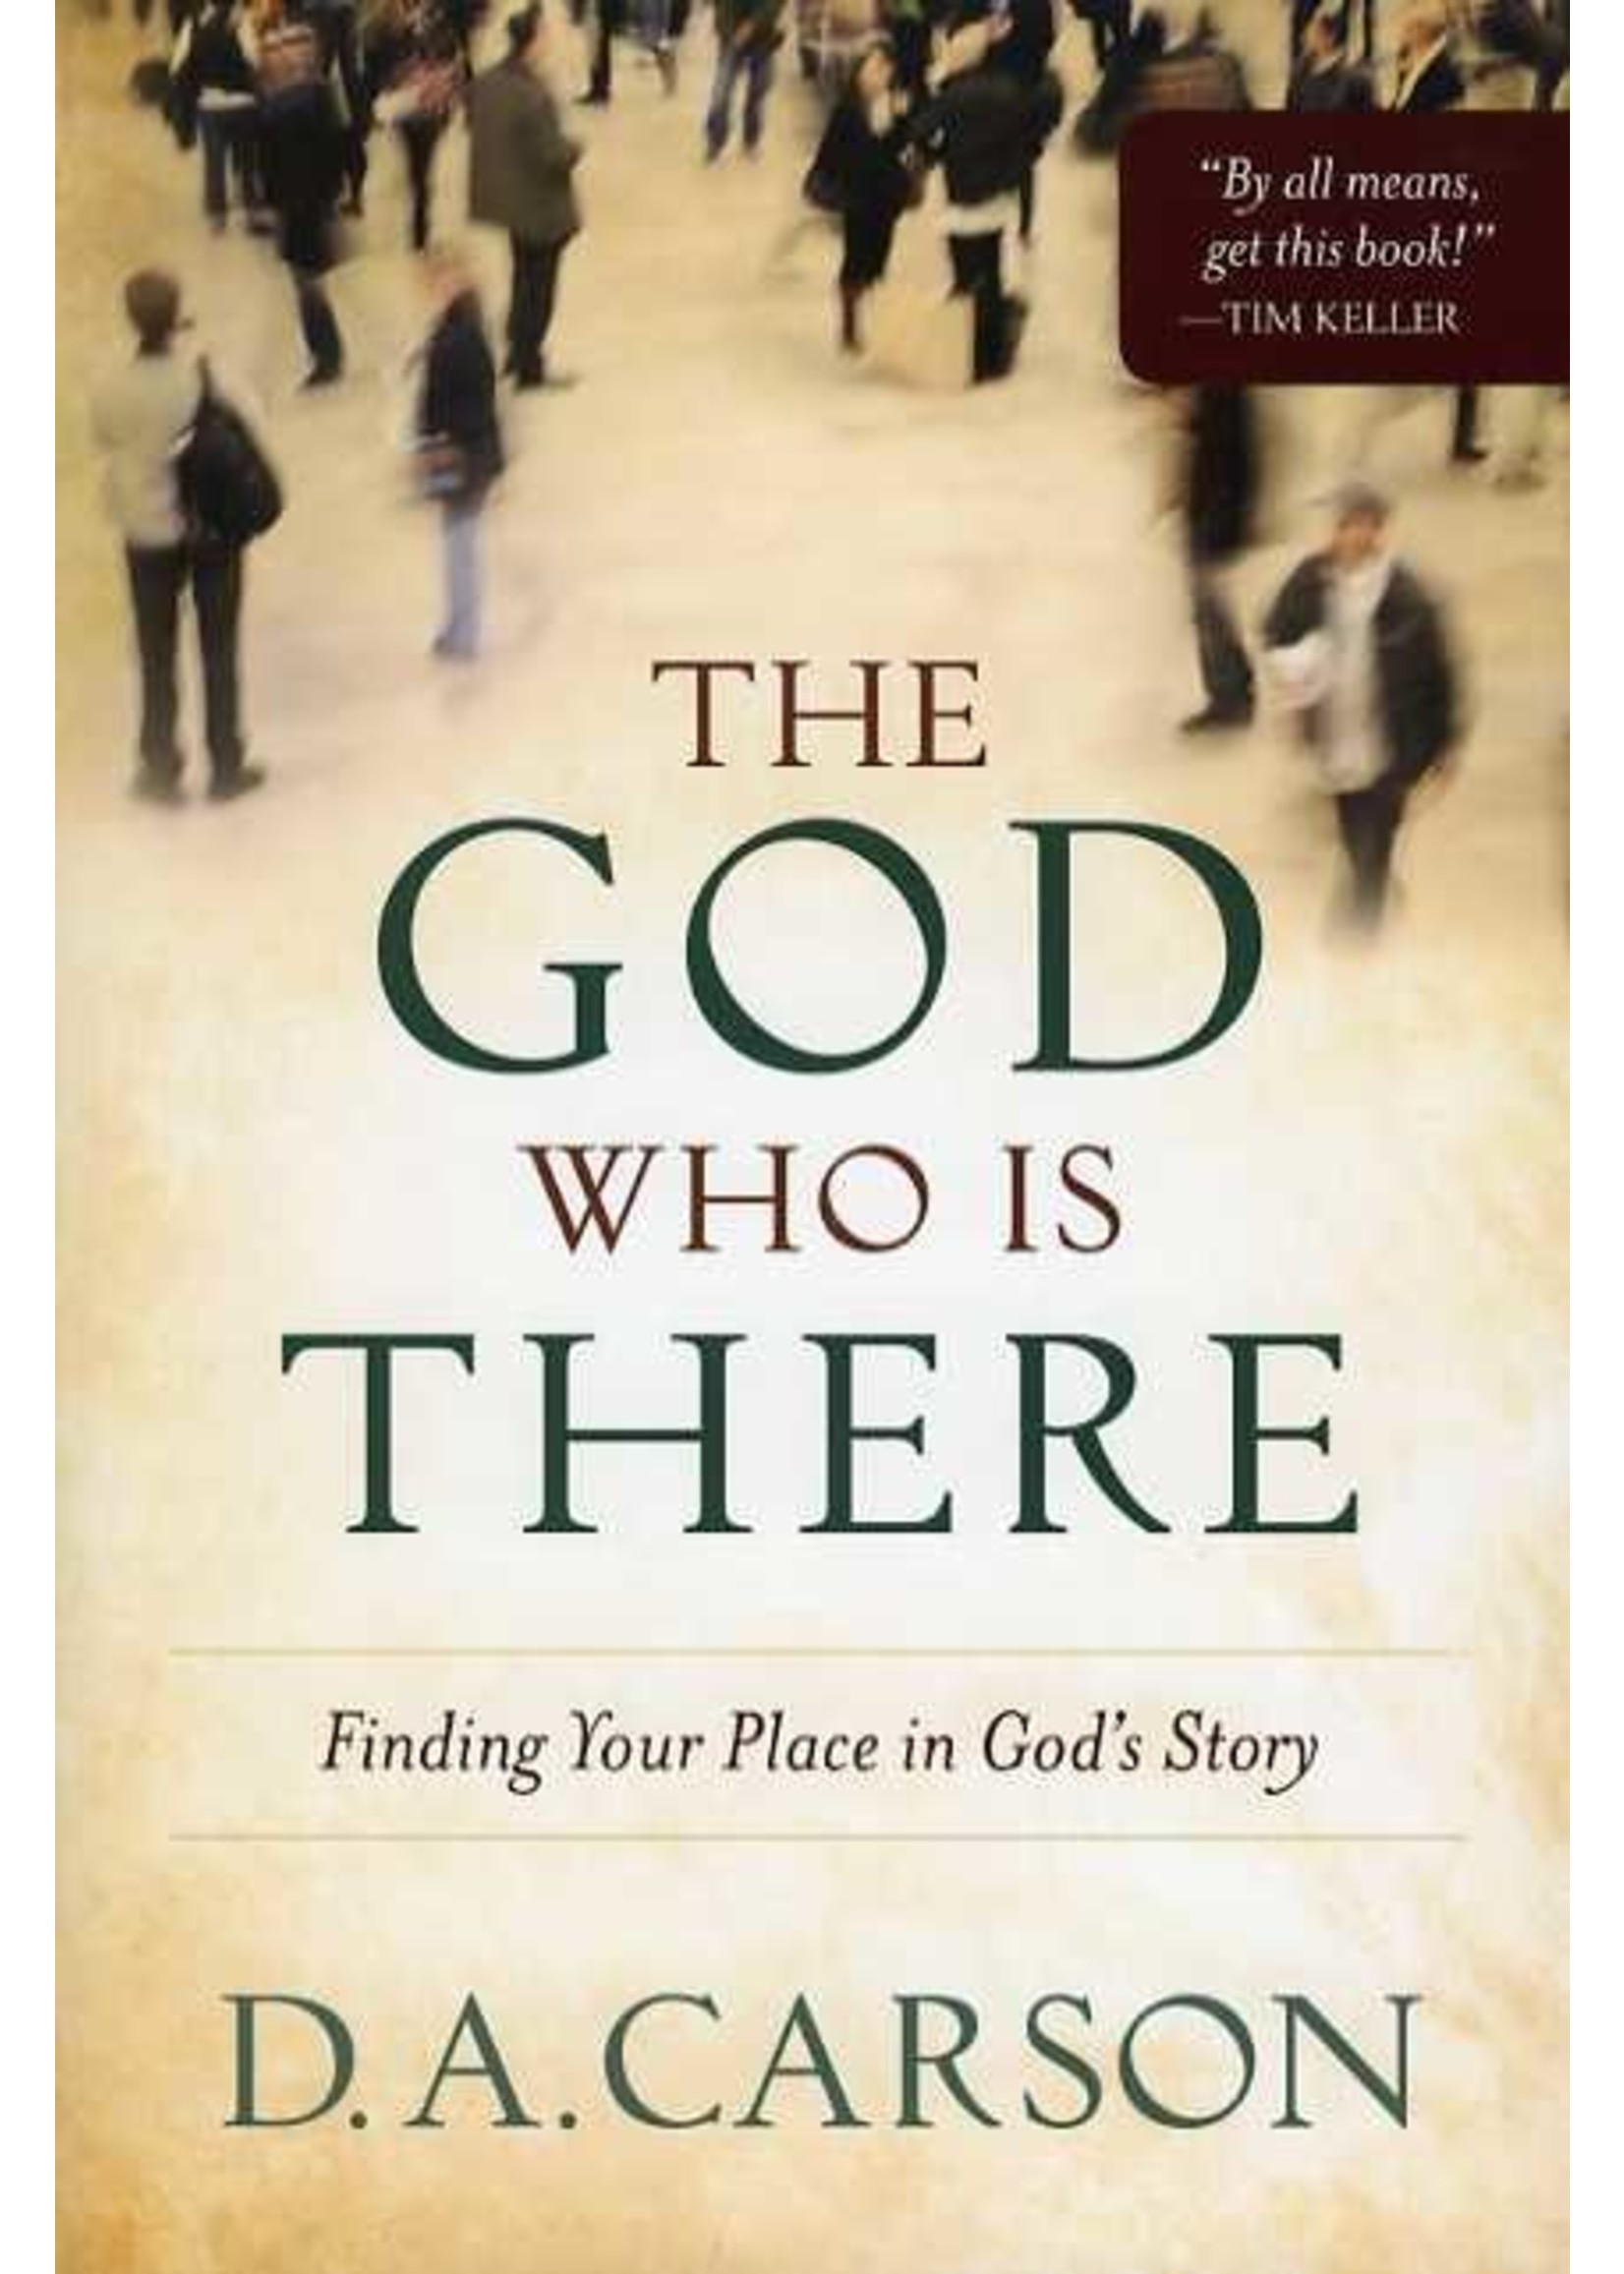 Baker Publishing The God Who Is There - D. A. Carson